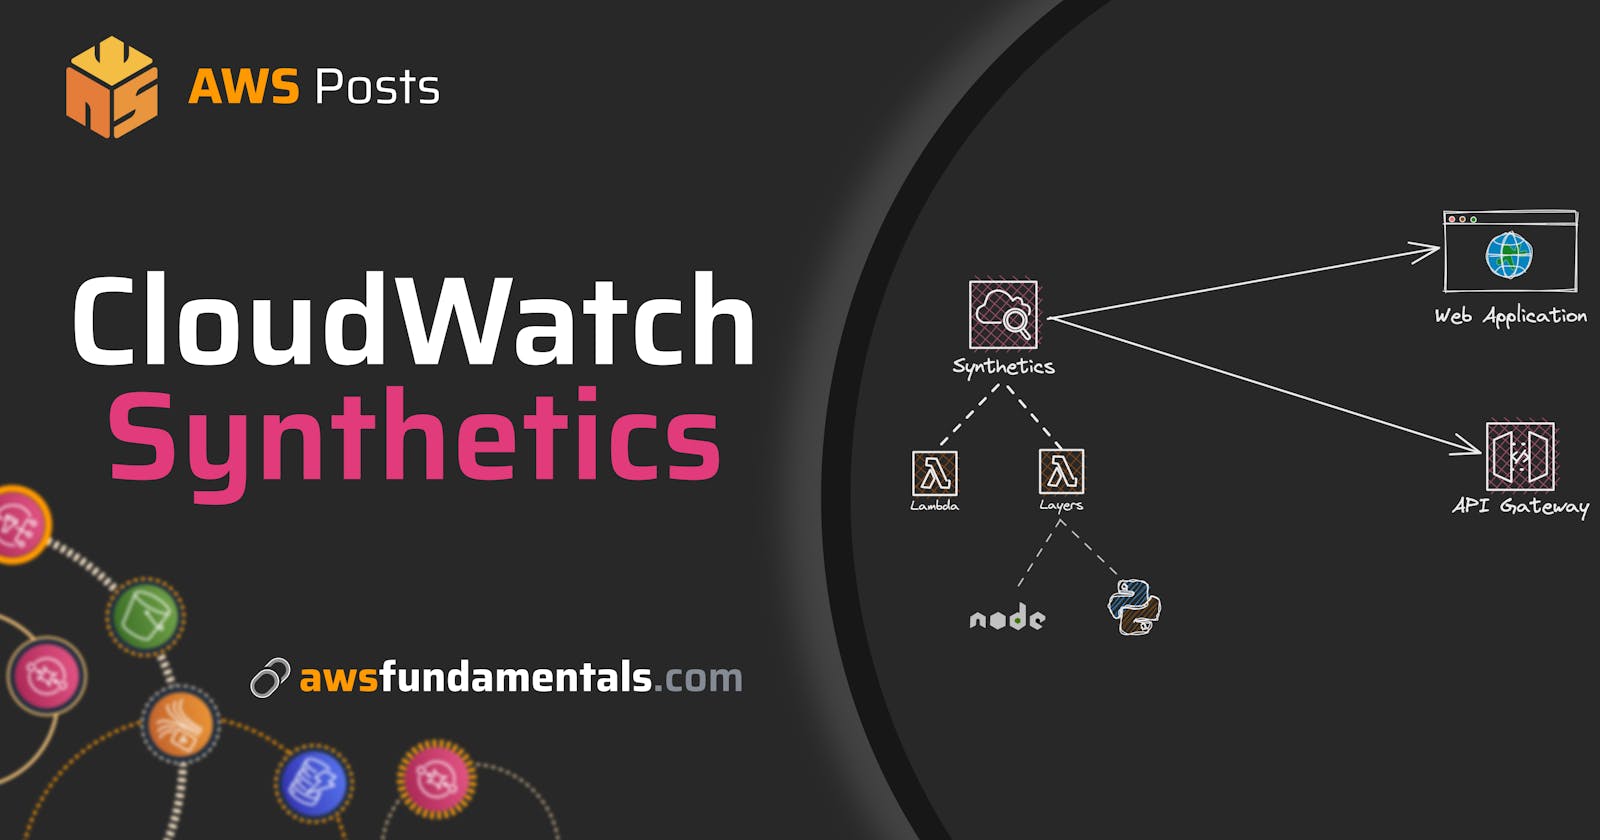 Use CloudWatch Synthetics to Monitor Your Web Application